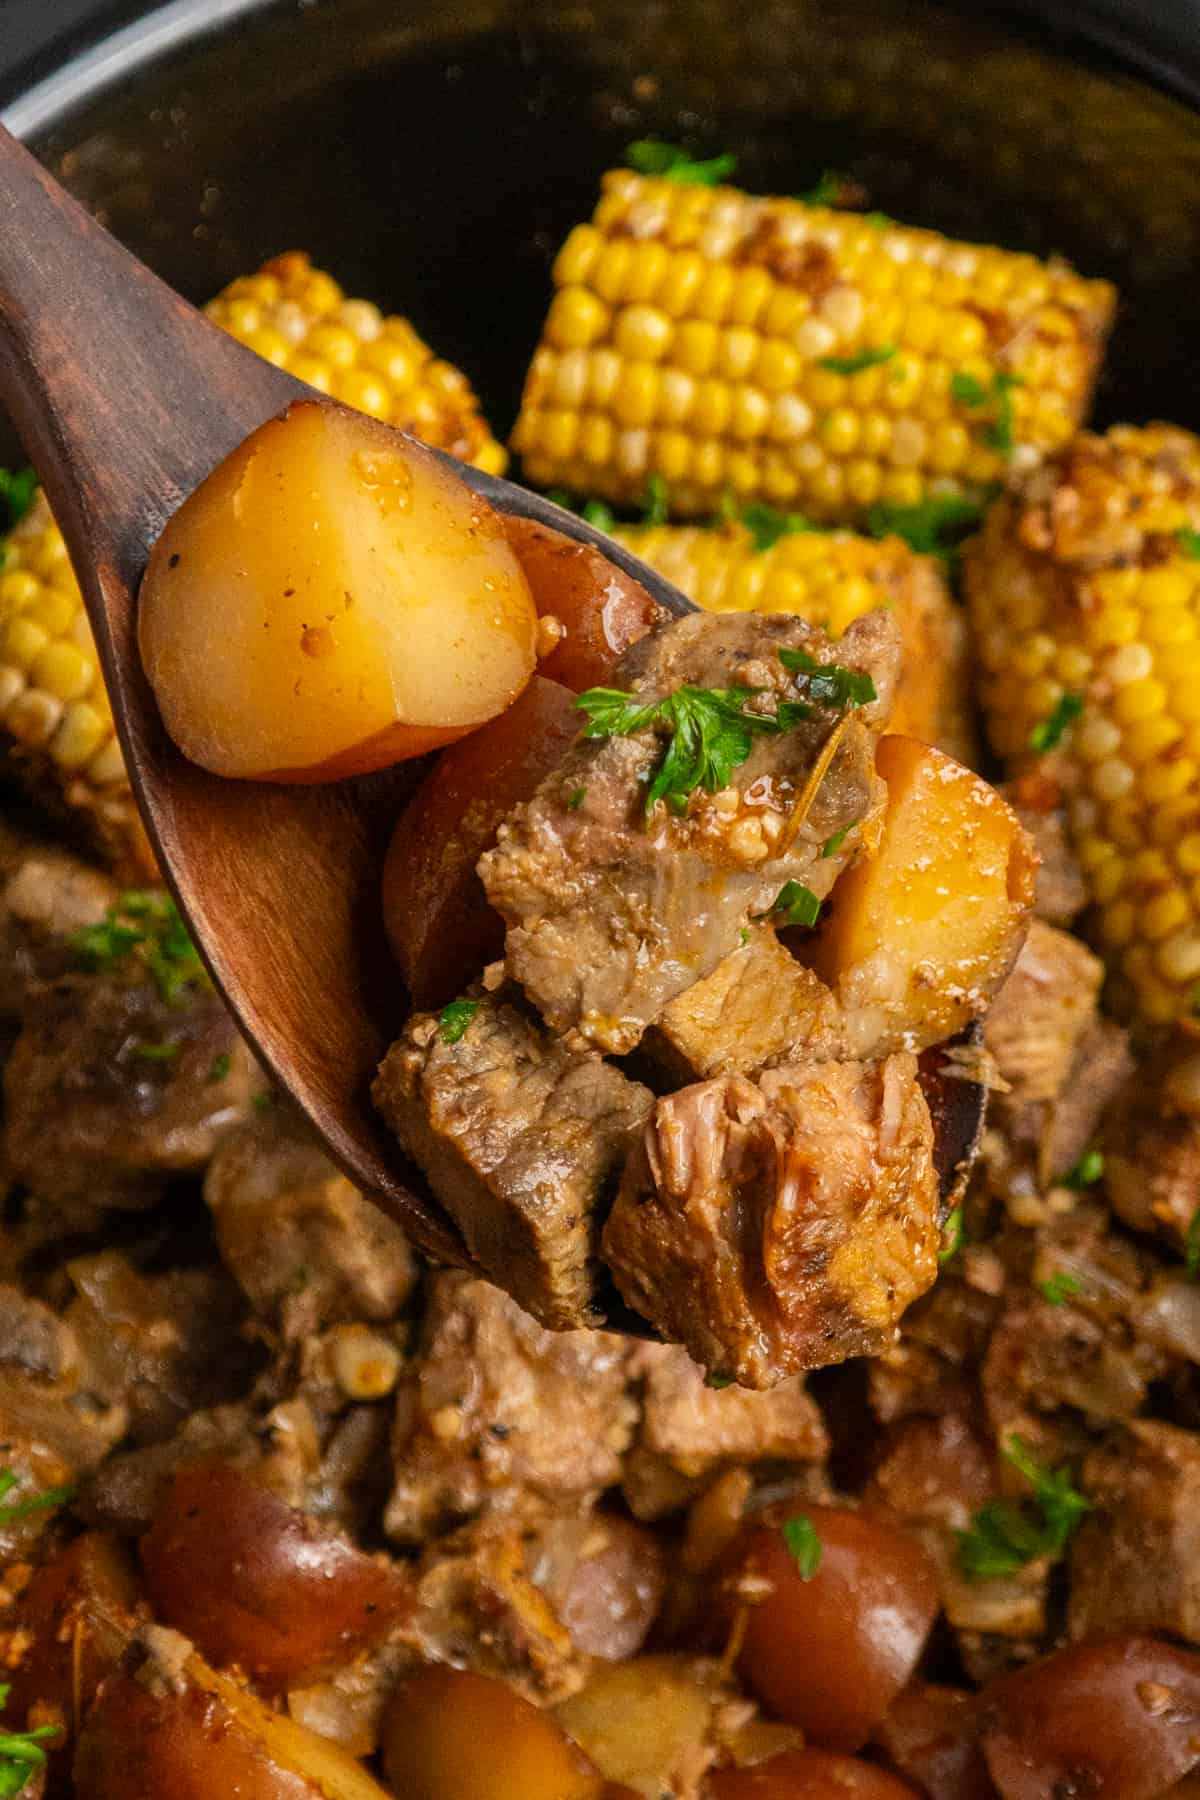 A wooden spoon holding a scoop of steak and potatoes over a slow cooker.